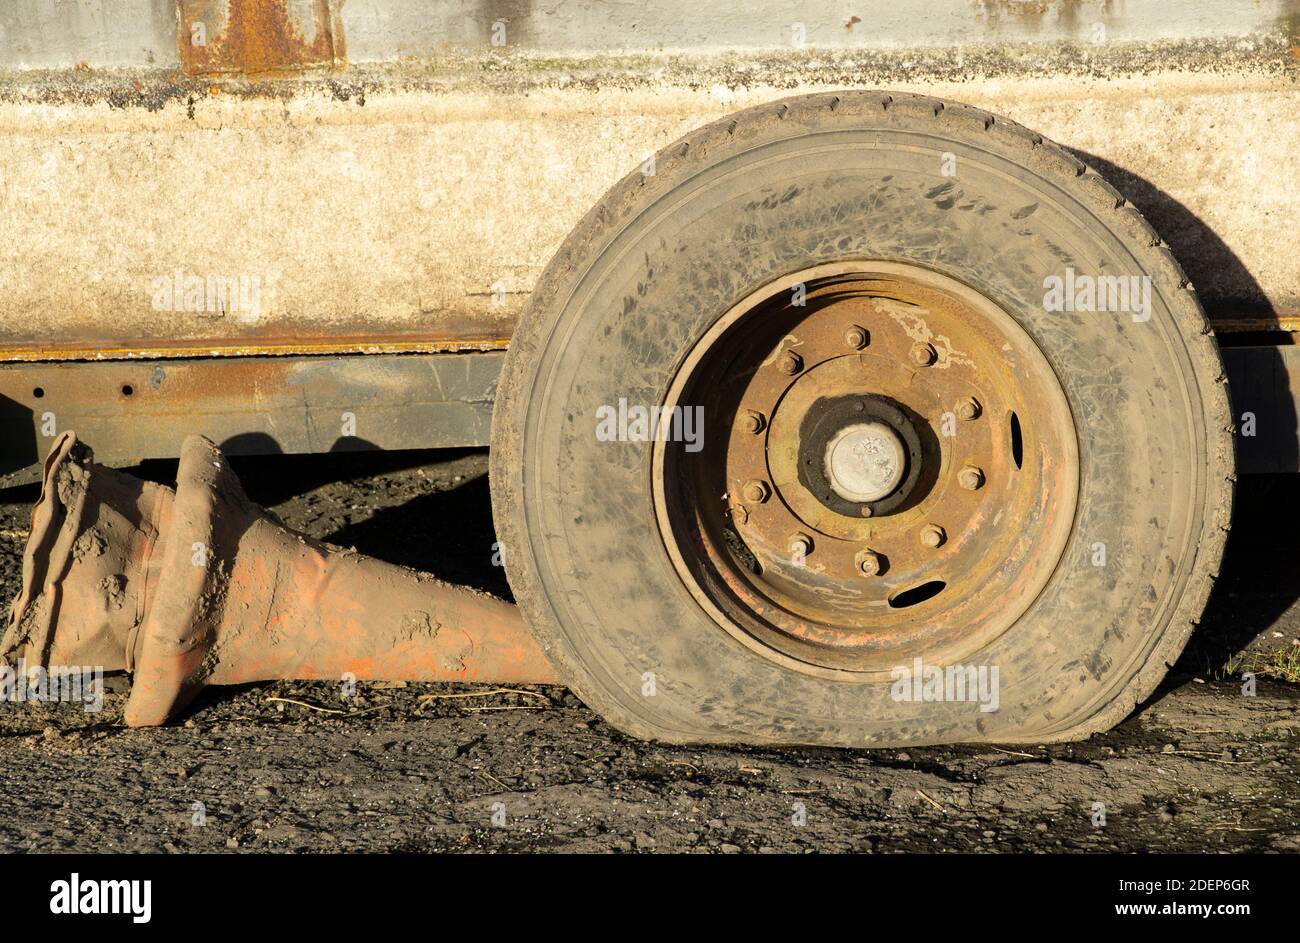 Old flat truck tyre Stock Photo